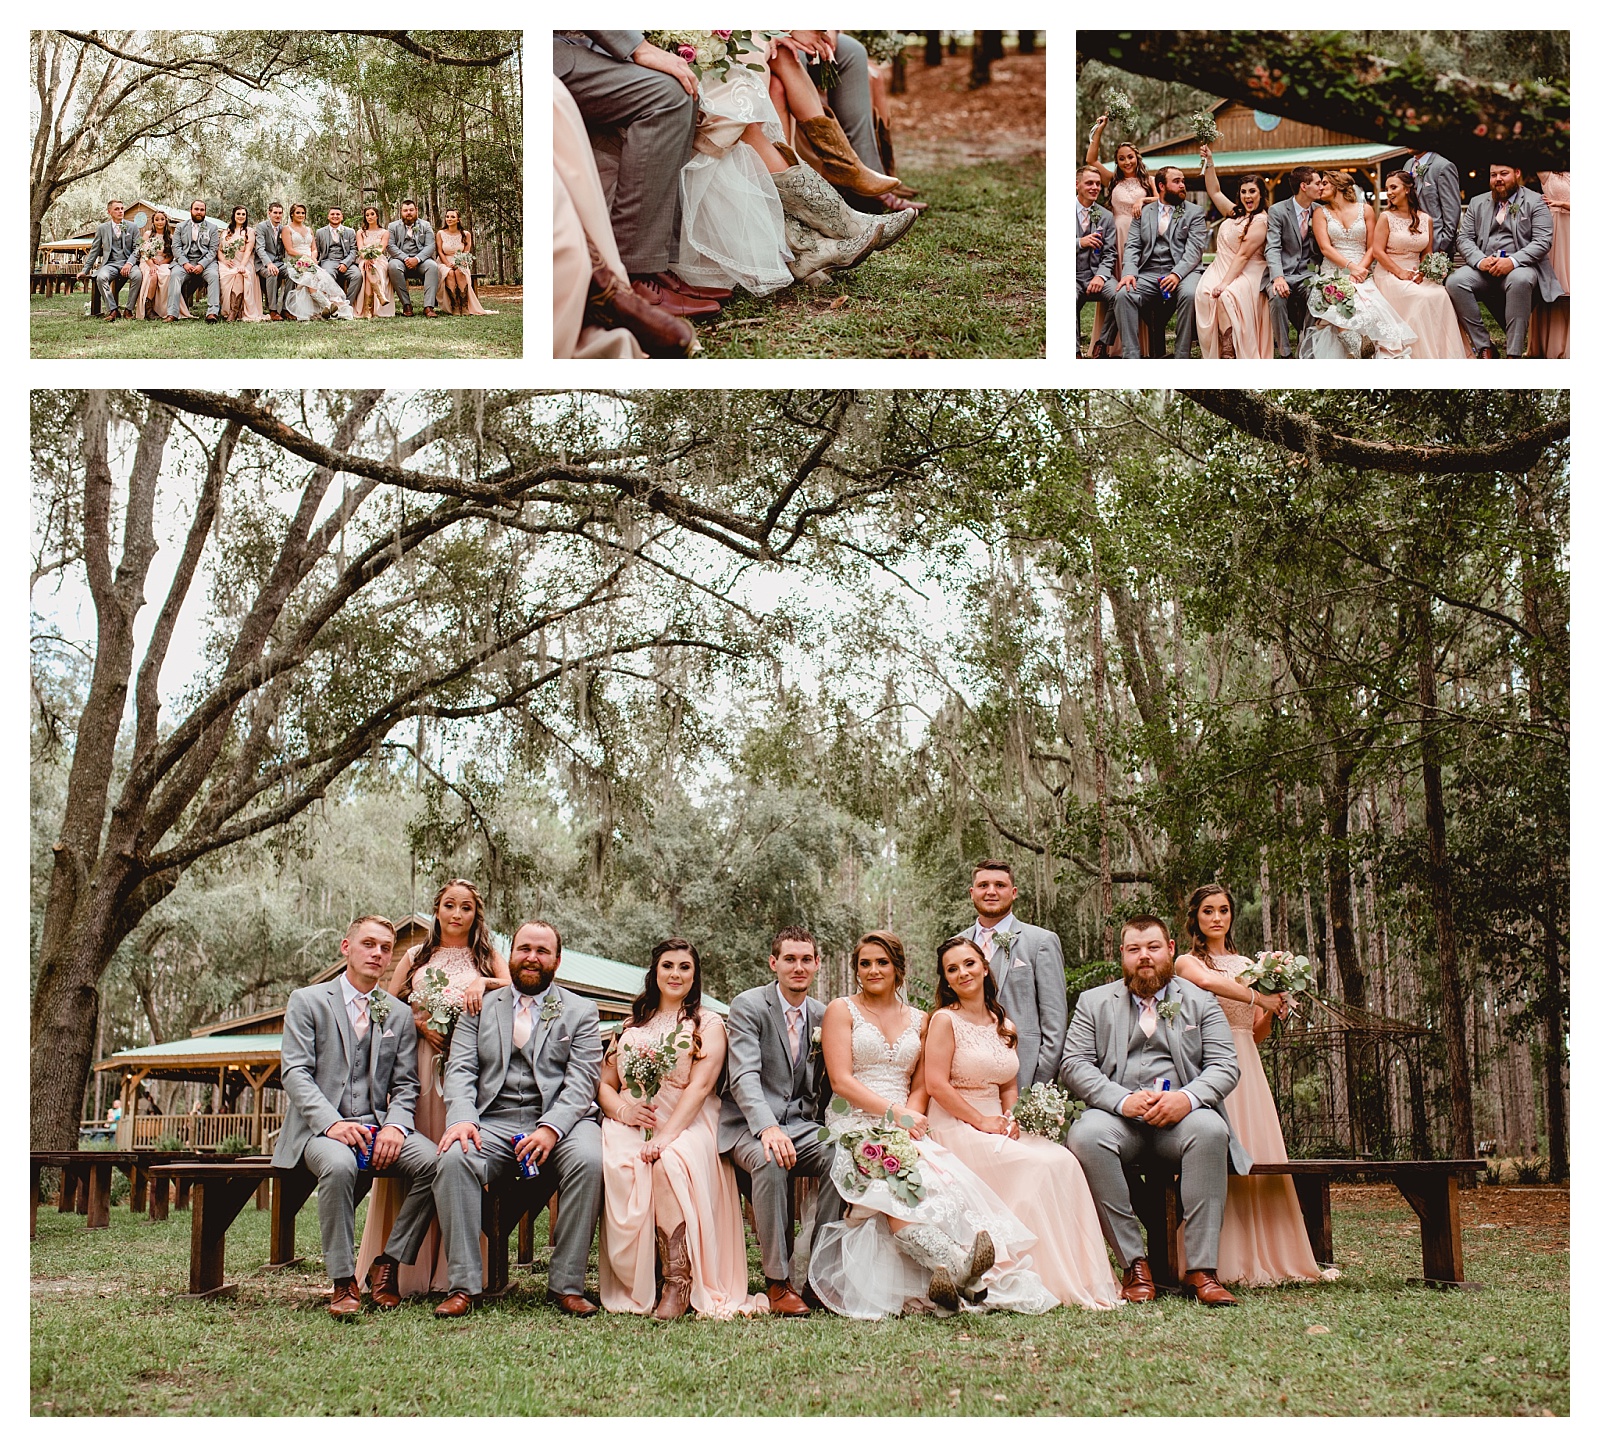 Bridal party creative photo out of the ordinary. Tallahassee photographer Shelly Williams Photography